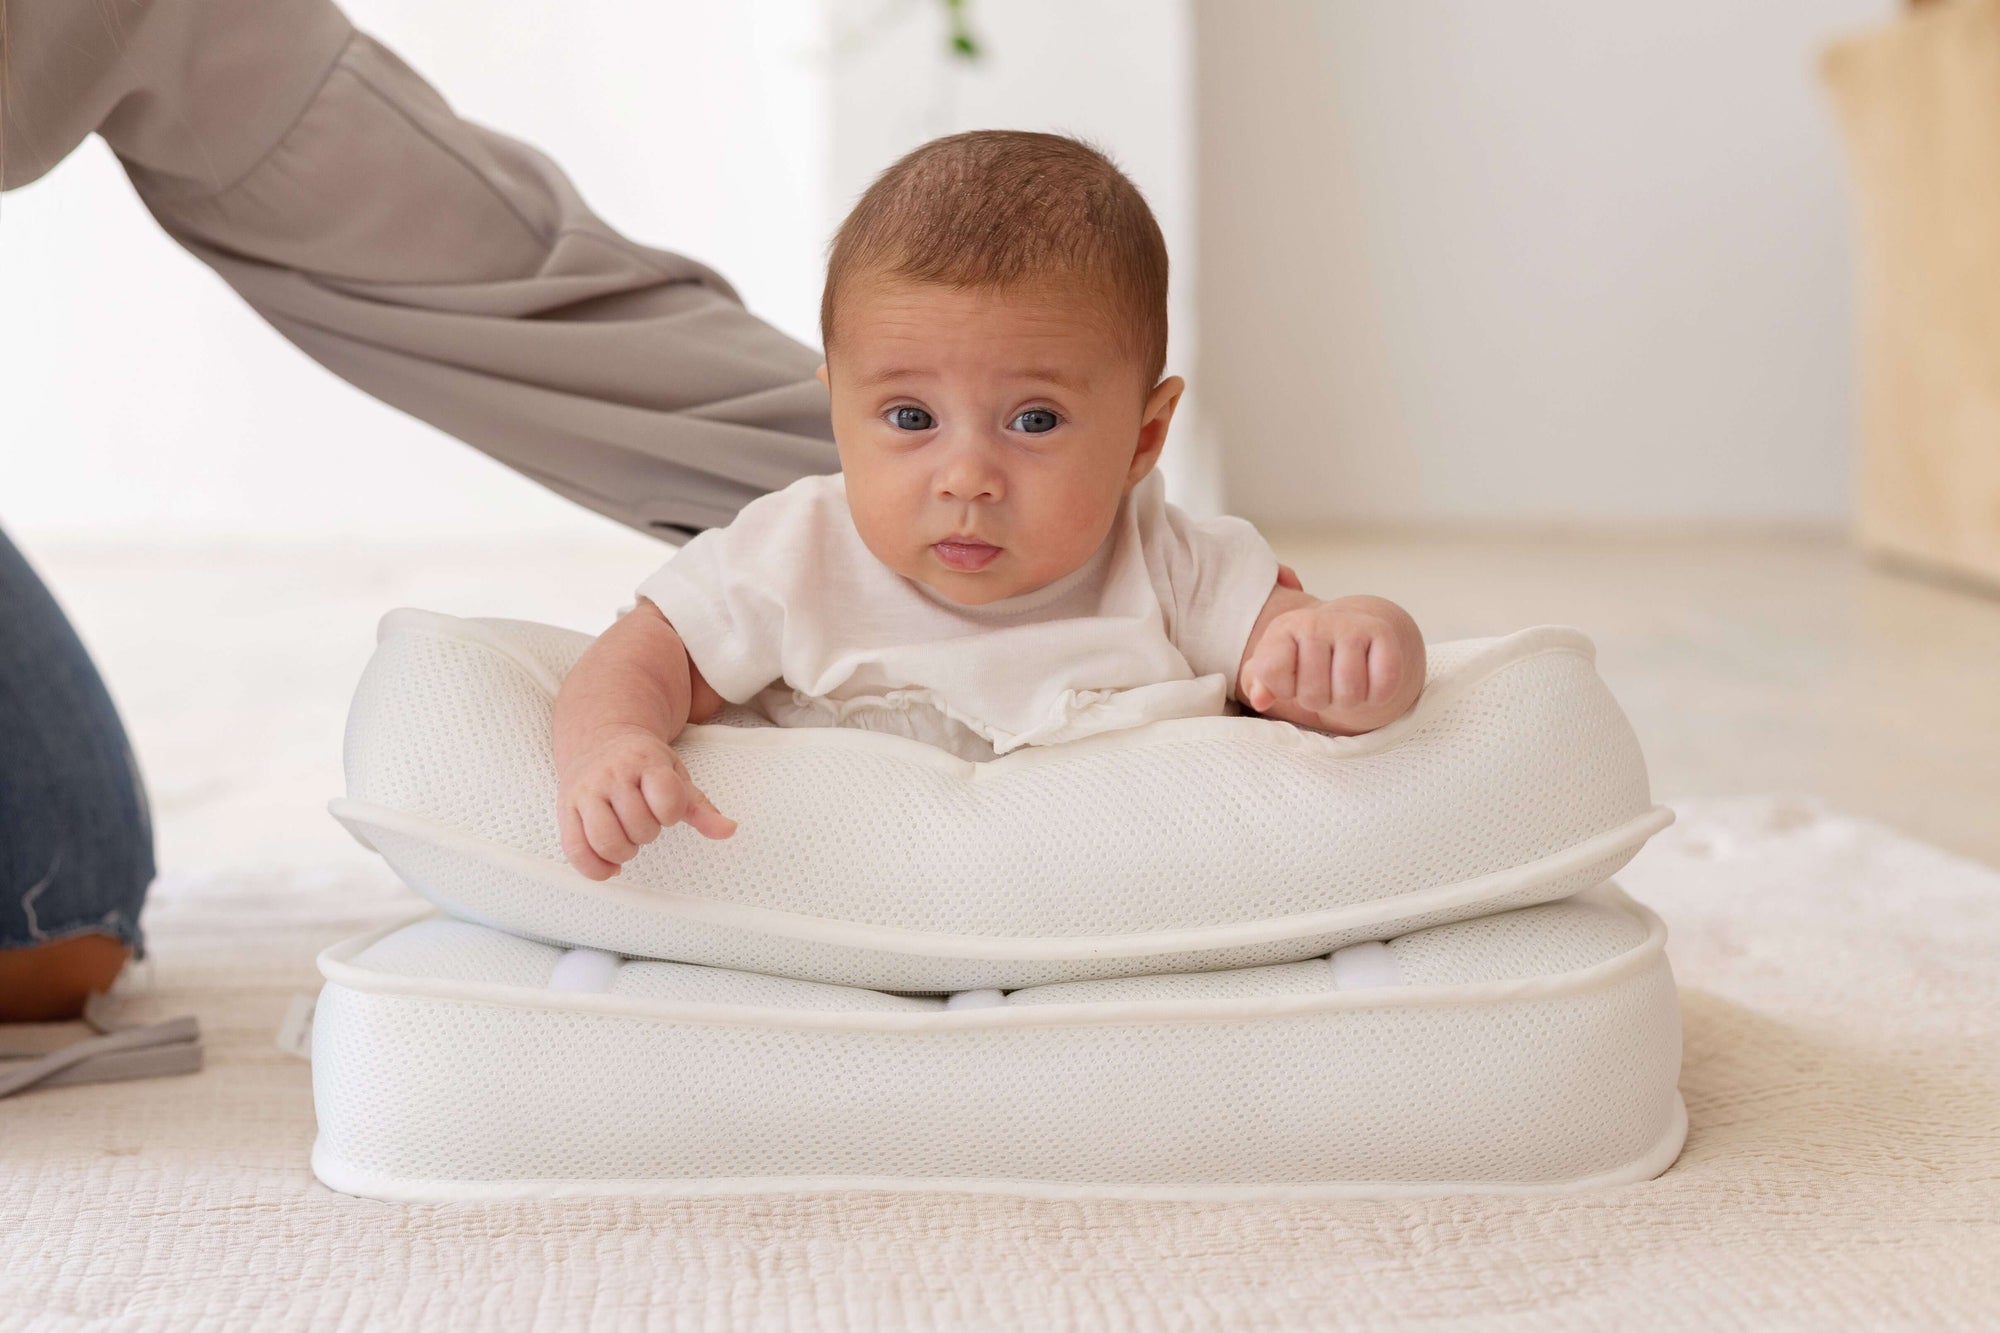 Mimos Play - Tummy Time Cushion - Interactive Cushion for Baby's Development